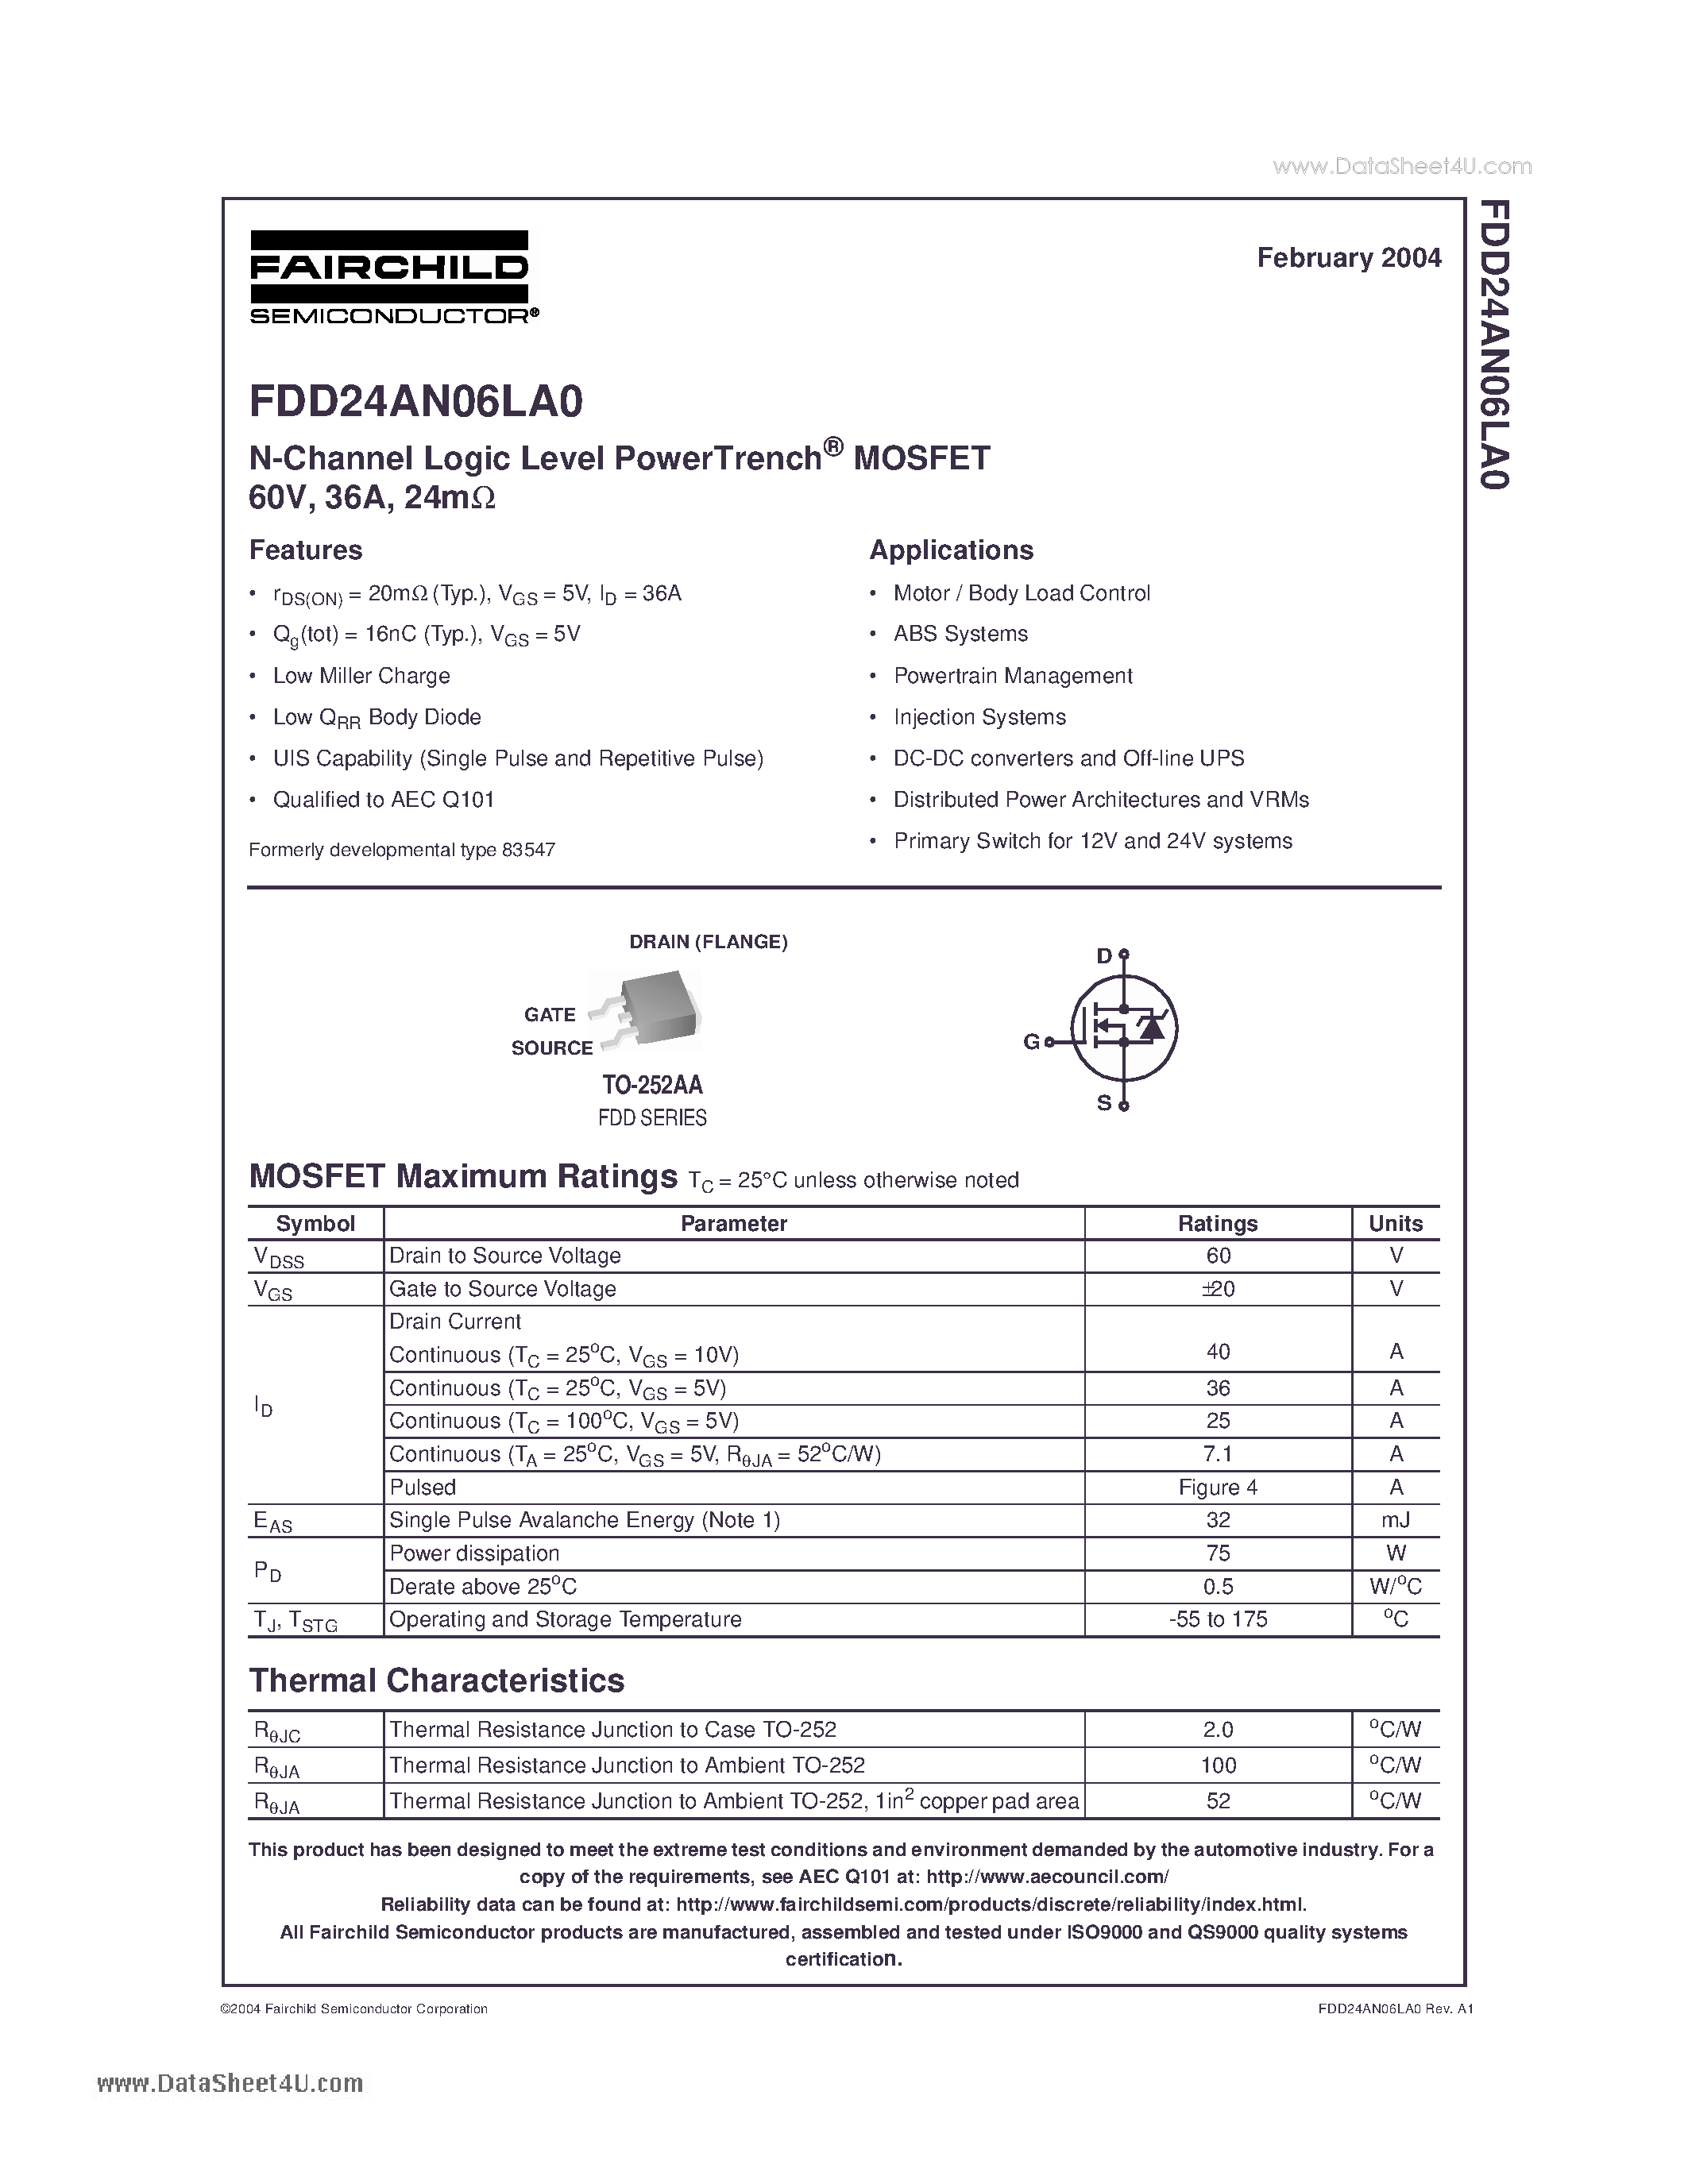 Даташит FDD24AN06LA0 - N CHANNEL LOGIC LEVEL POWER TRENCH MOSFET страница 1